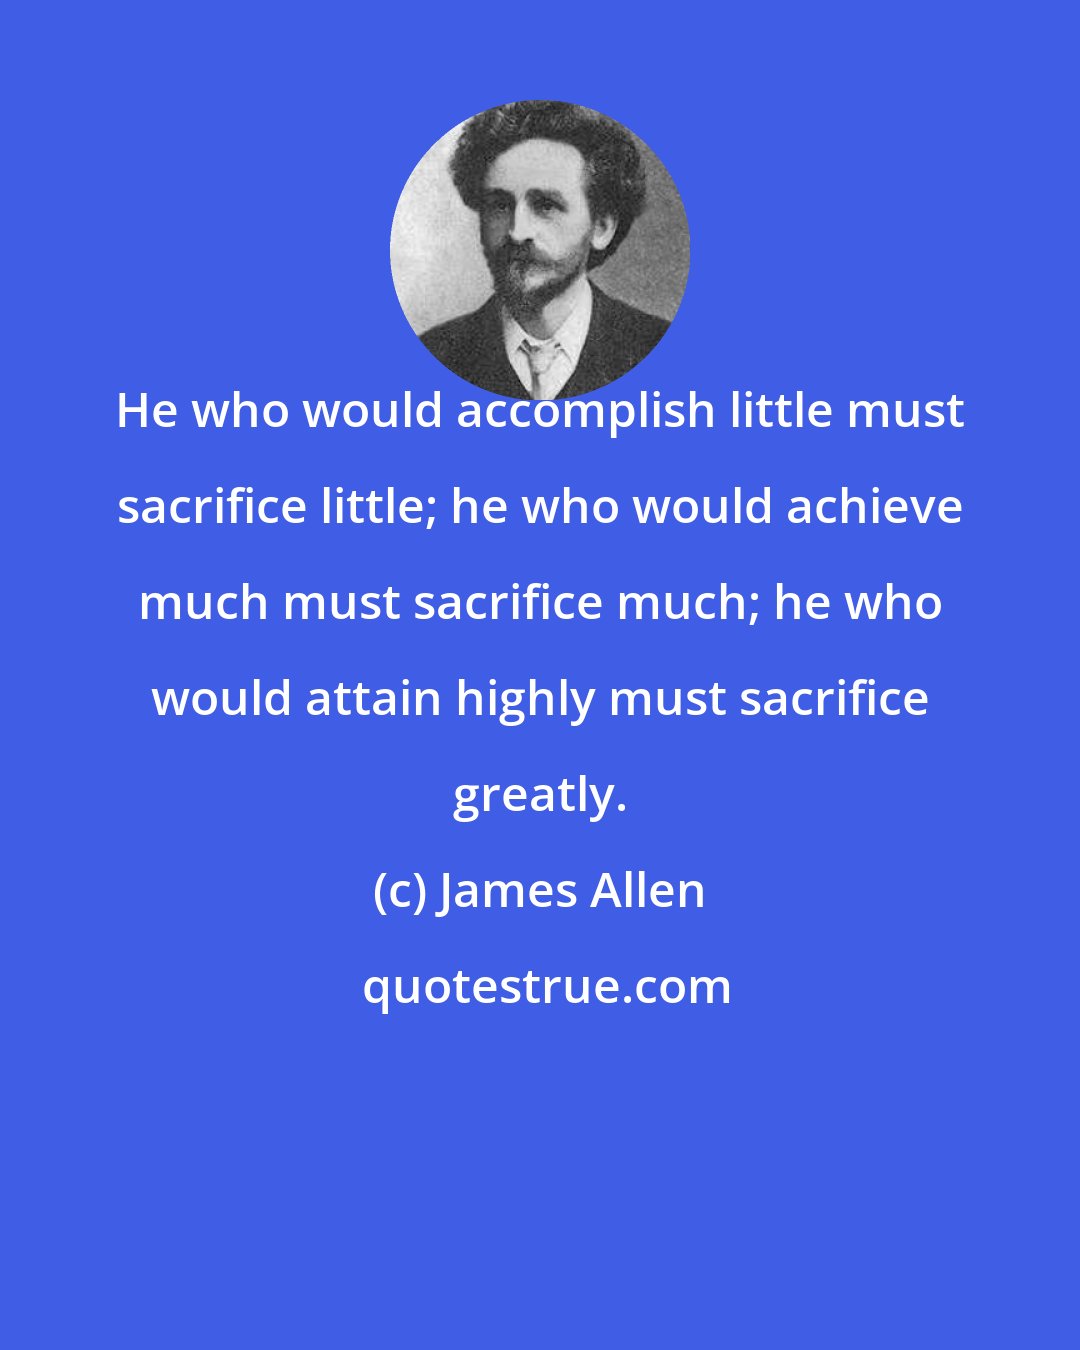 James Allen: He who would accomplish little must sacrifice little; he who would achieve much must sacrifice much; he who would attain highly must sacrifice greatly.